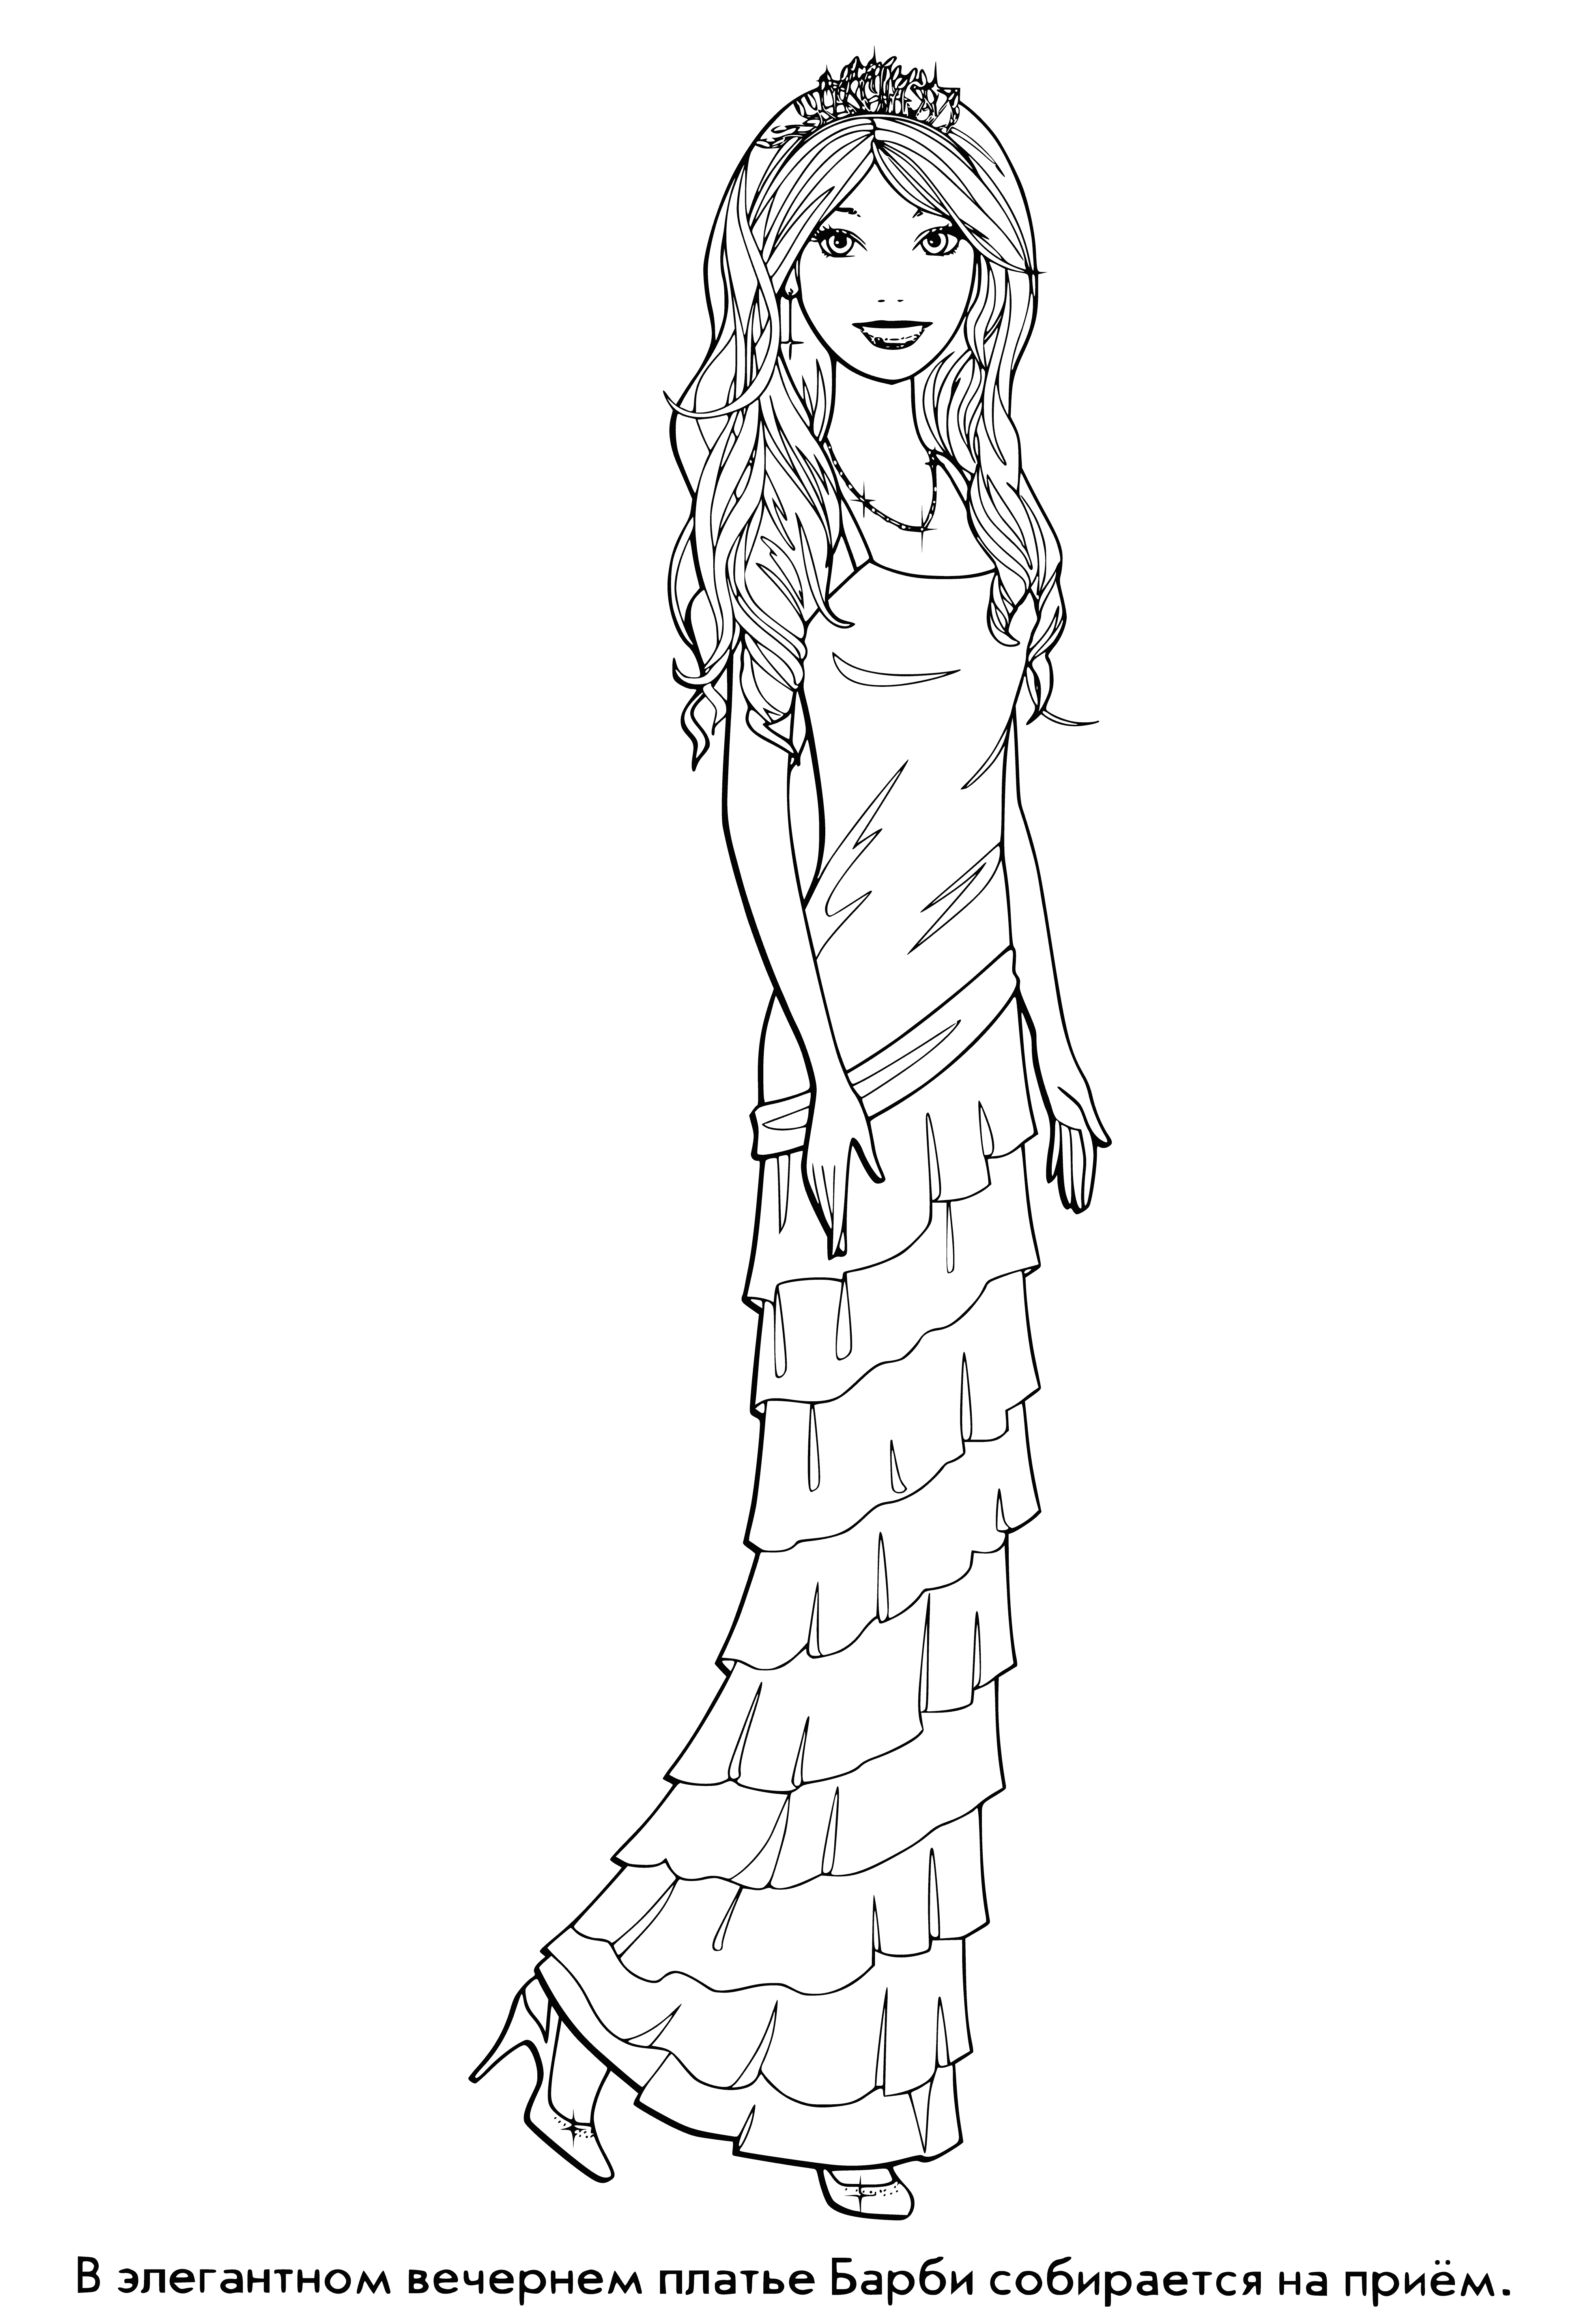 coloring page: Barbie sits in chair, wearing pink dress, blonde bob, pink lipstick & earrings. Nurse stands next to her, holding a blood pressure cuff.